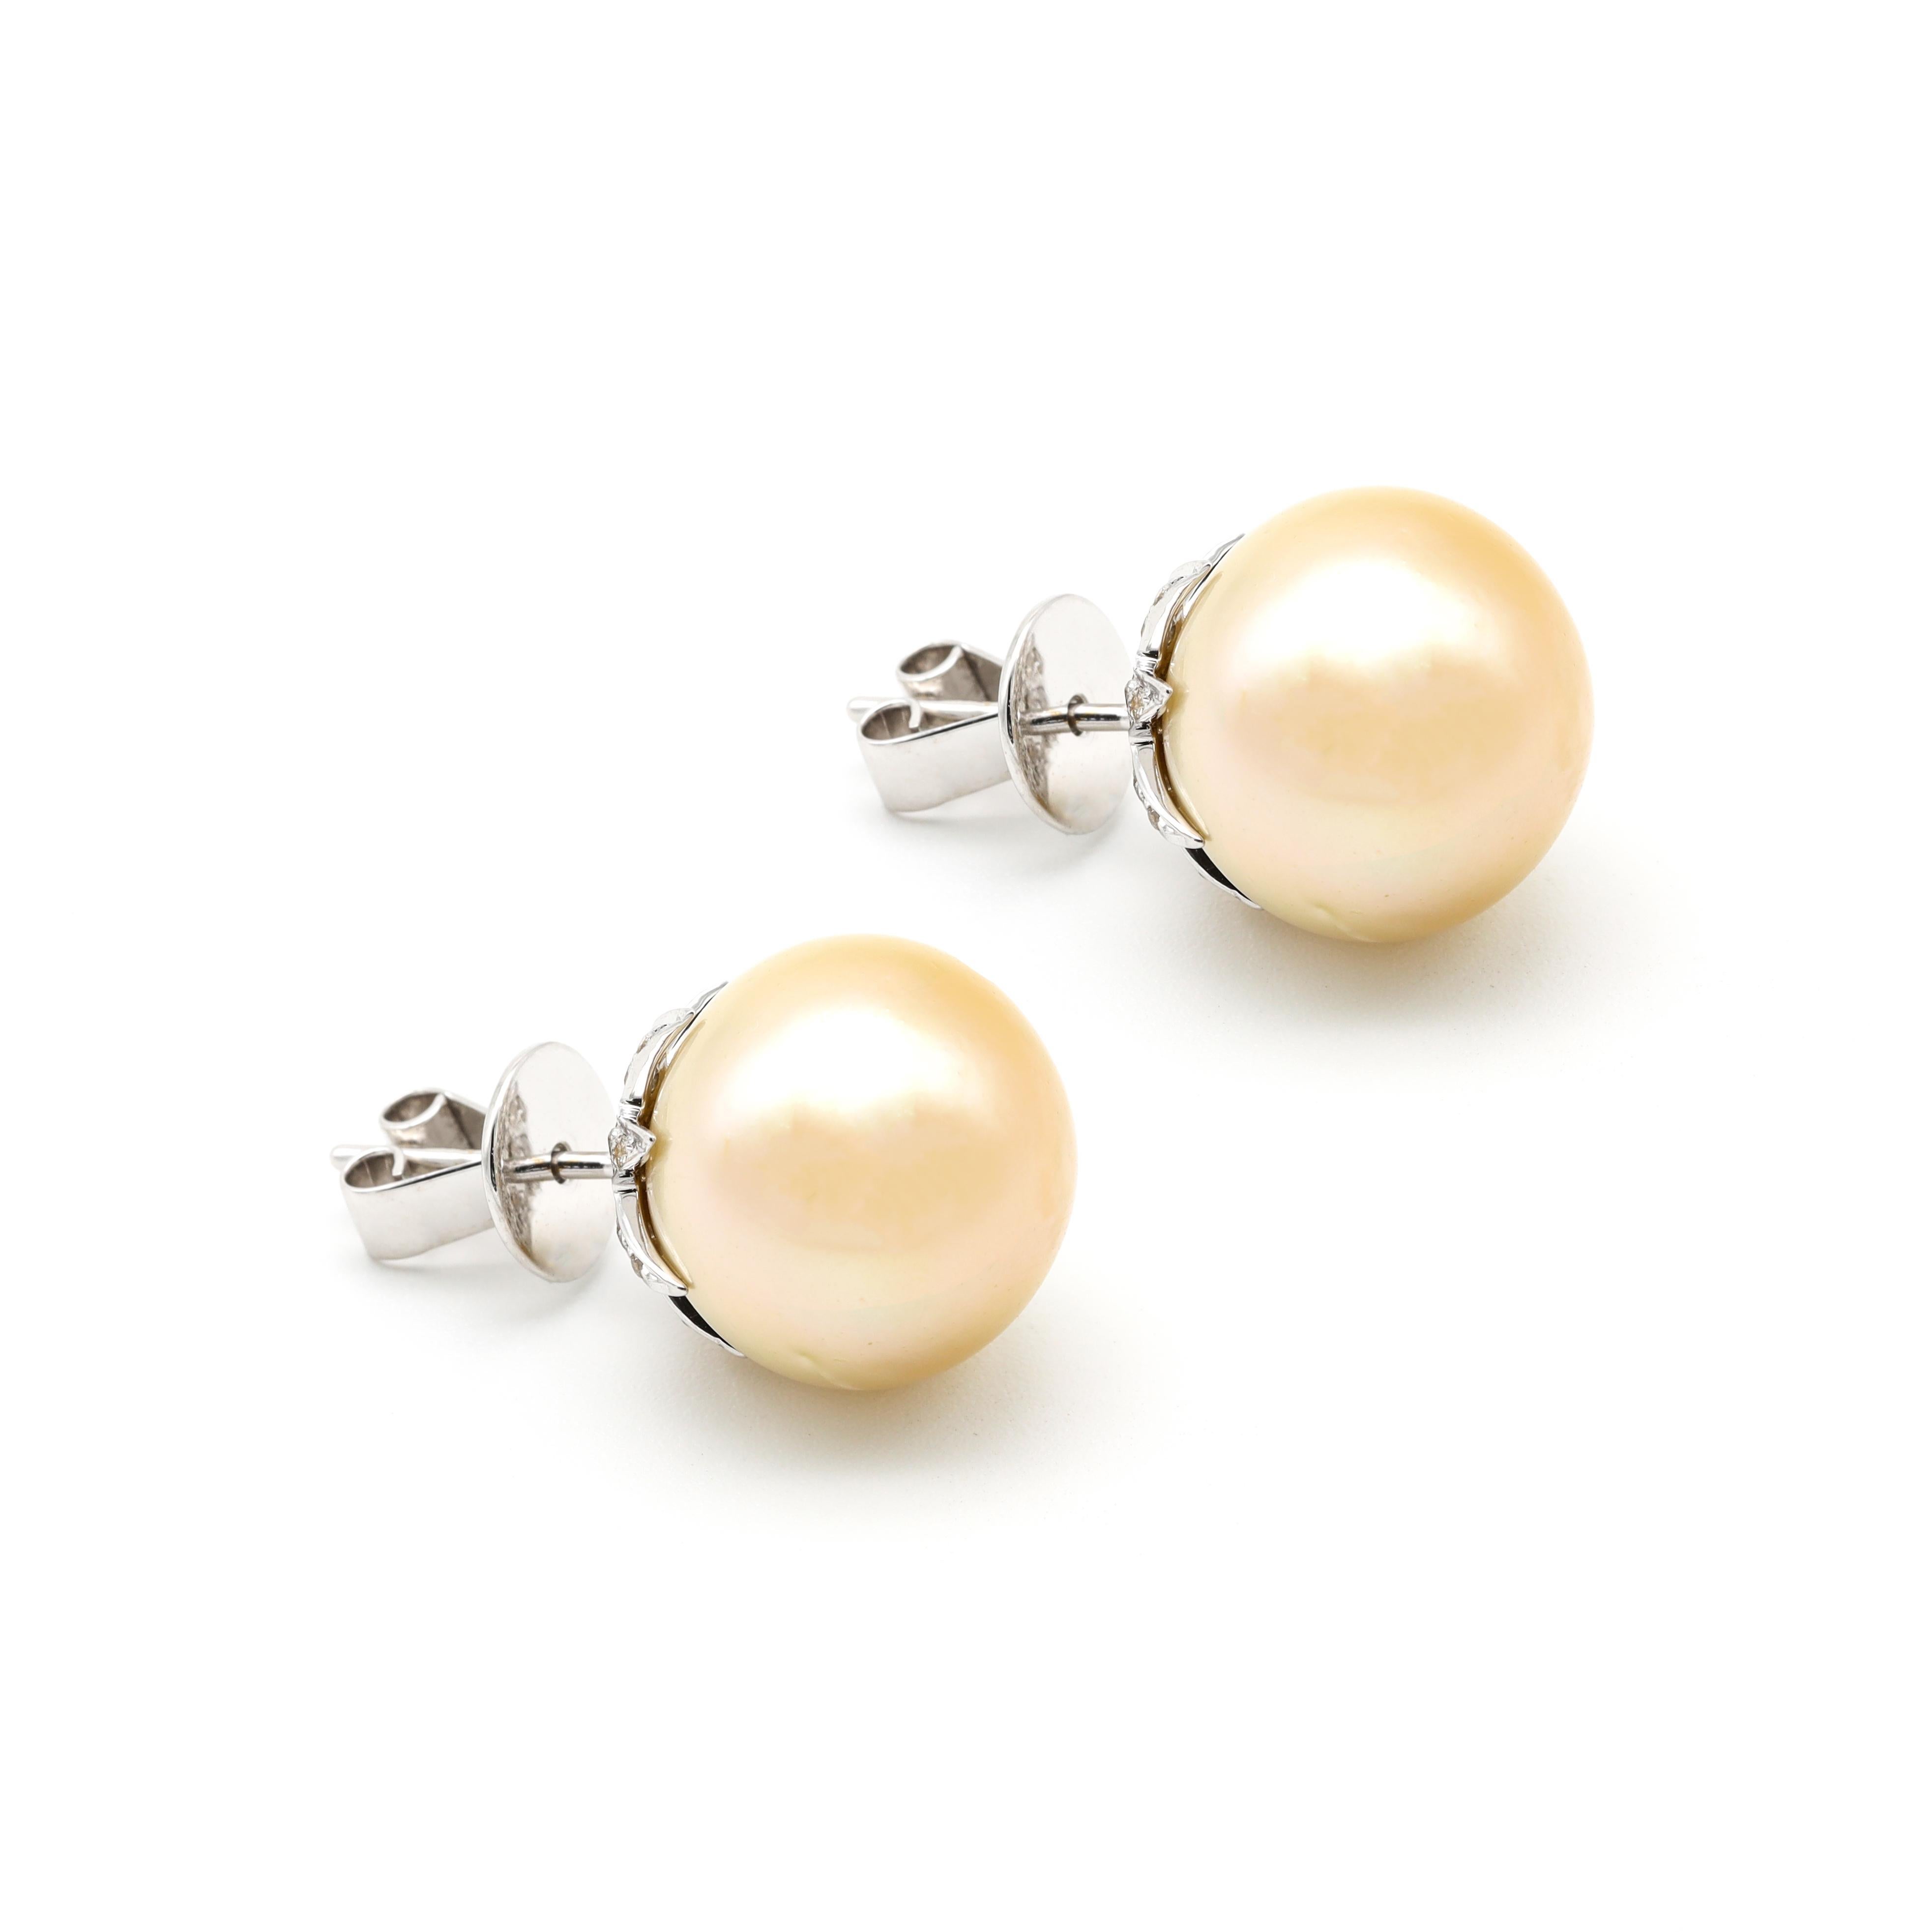 18 Karat White Gold Natural South Sea Pearl and Diamond Stud Earrings 

This classic circular golden pearl stud earring is distinctively defined. The exquisite ideal natural golden south-sea pearl pair is elegantly drilled set in white gold with the